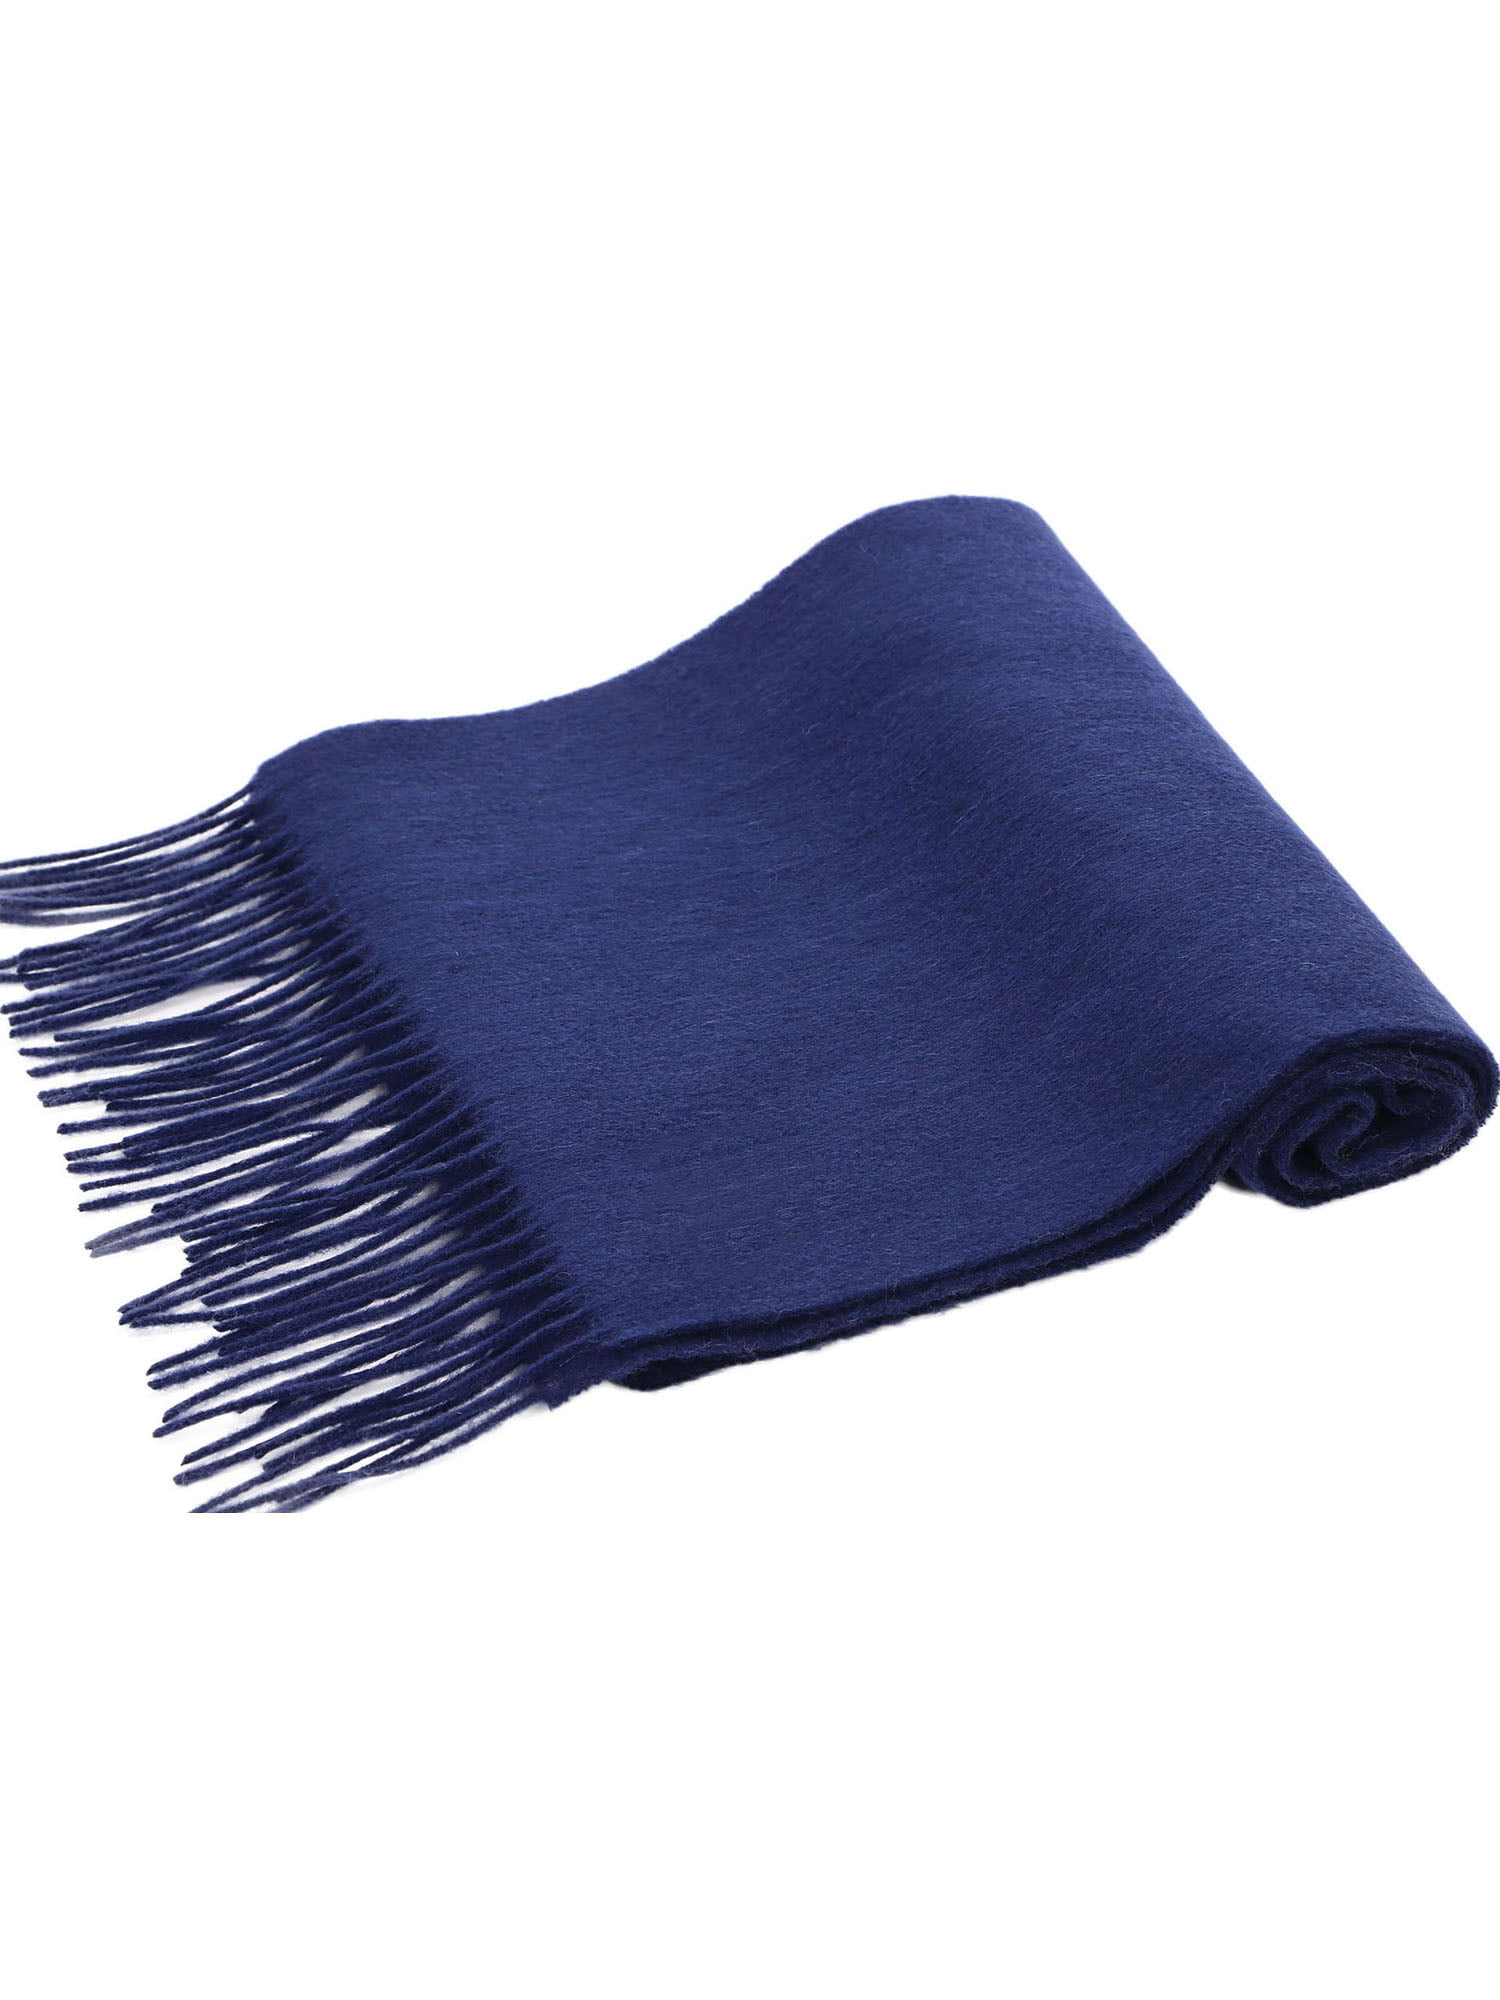 Luxurious and soft In retail box. men or women Urban Edge 100% cashmere scarf